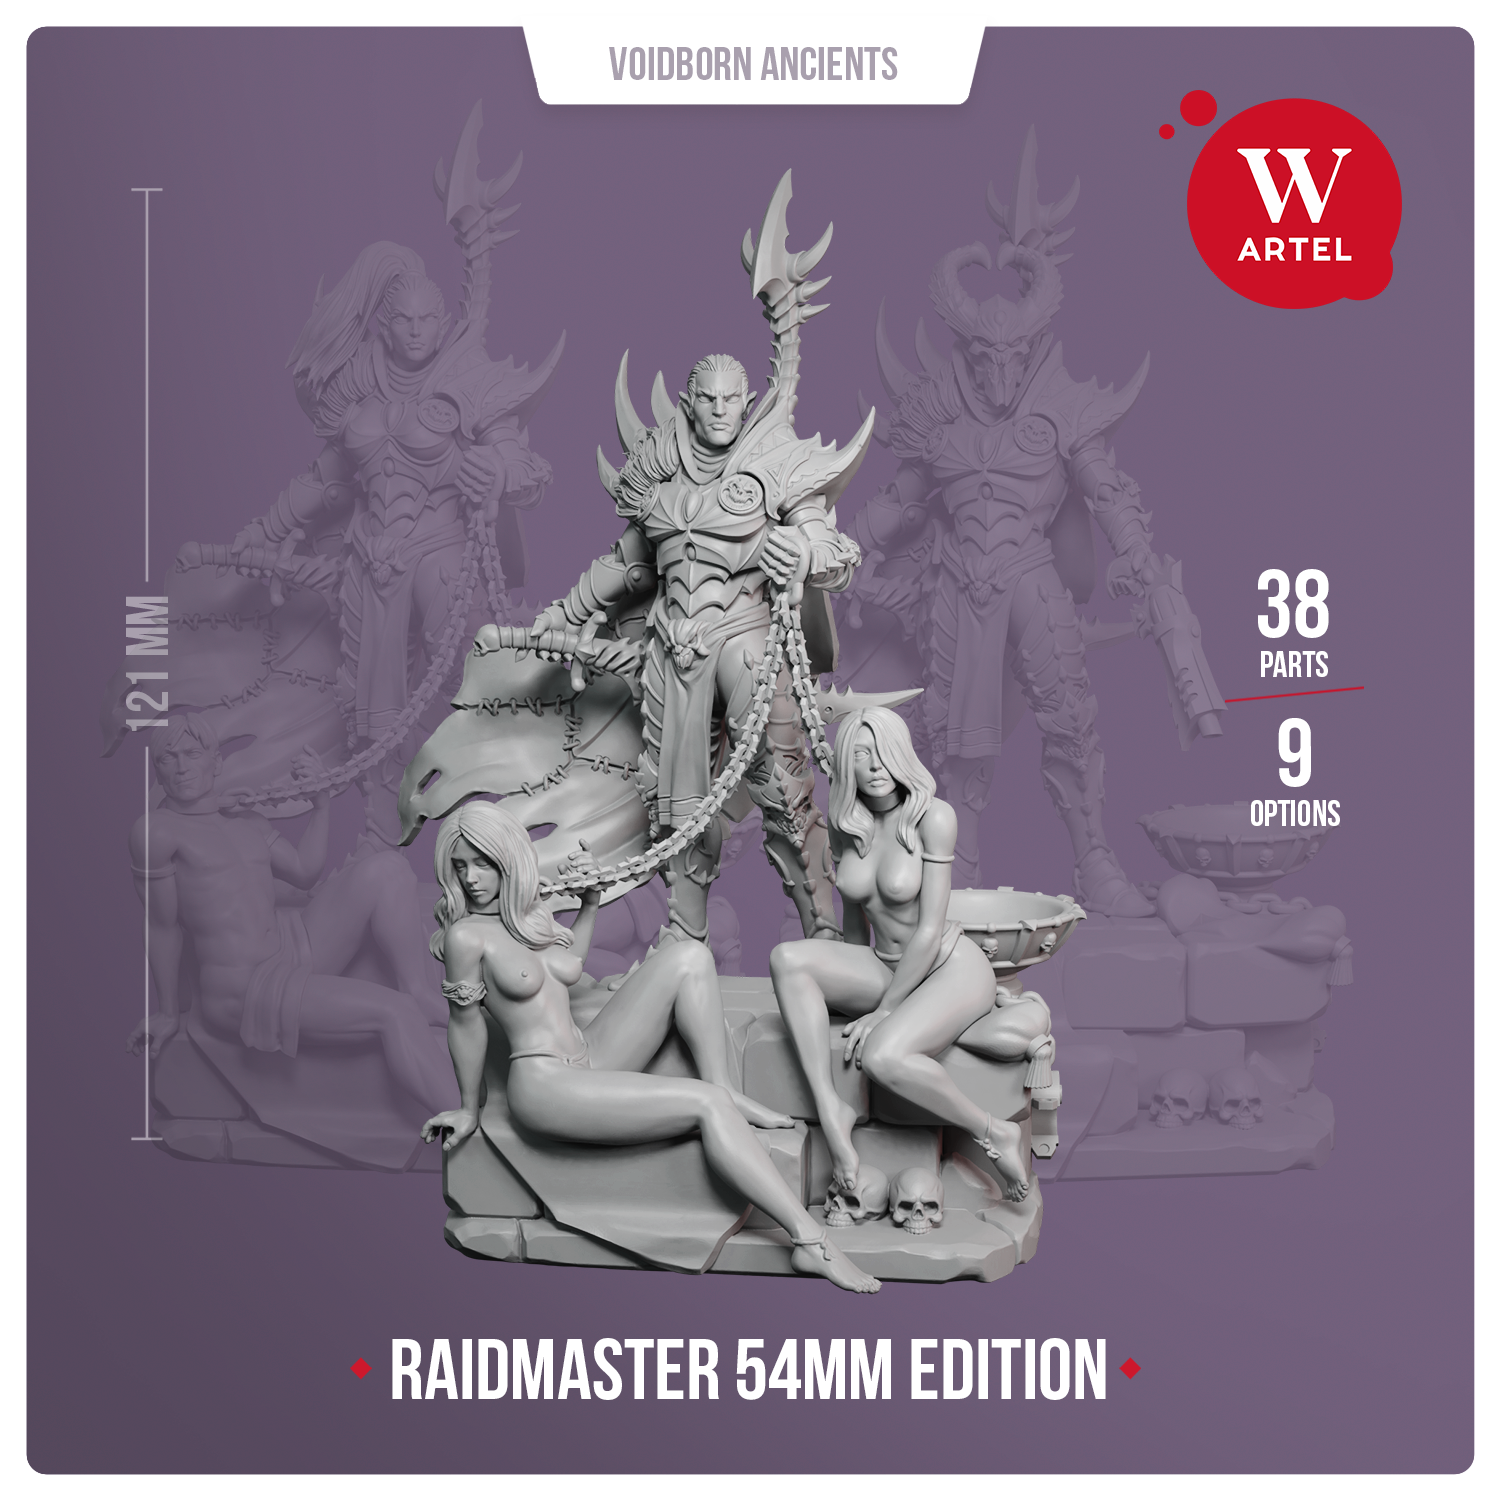 Raidmaster 54mm Edition (without slaves)